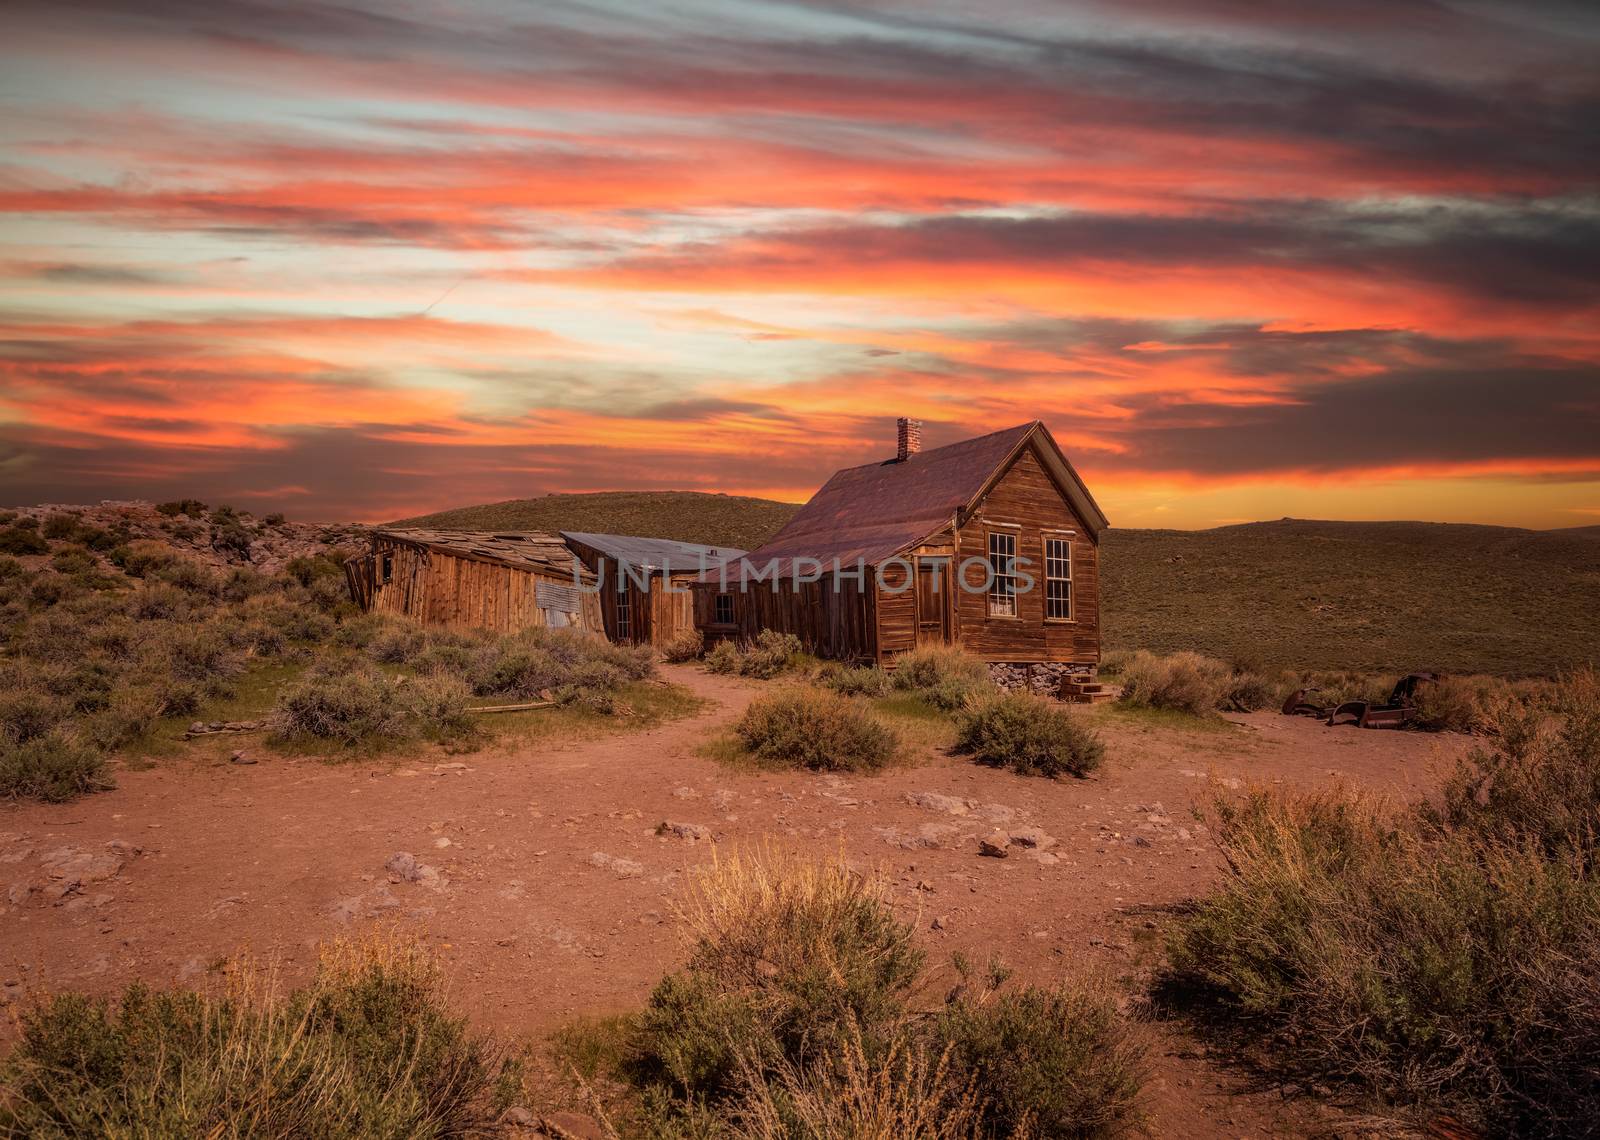 Sunset over Bodie ghost town in California. Bodie is a historic state park from a gold rush era  in the Bodie Hills east of the Sierra Nevada.